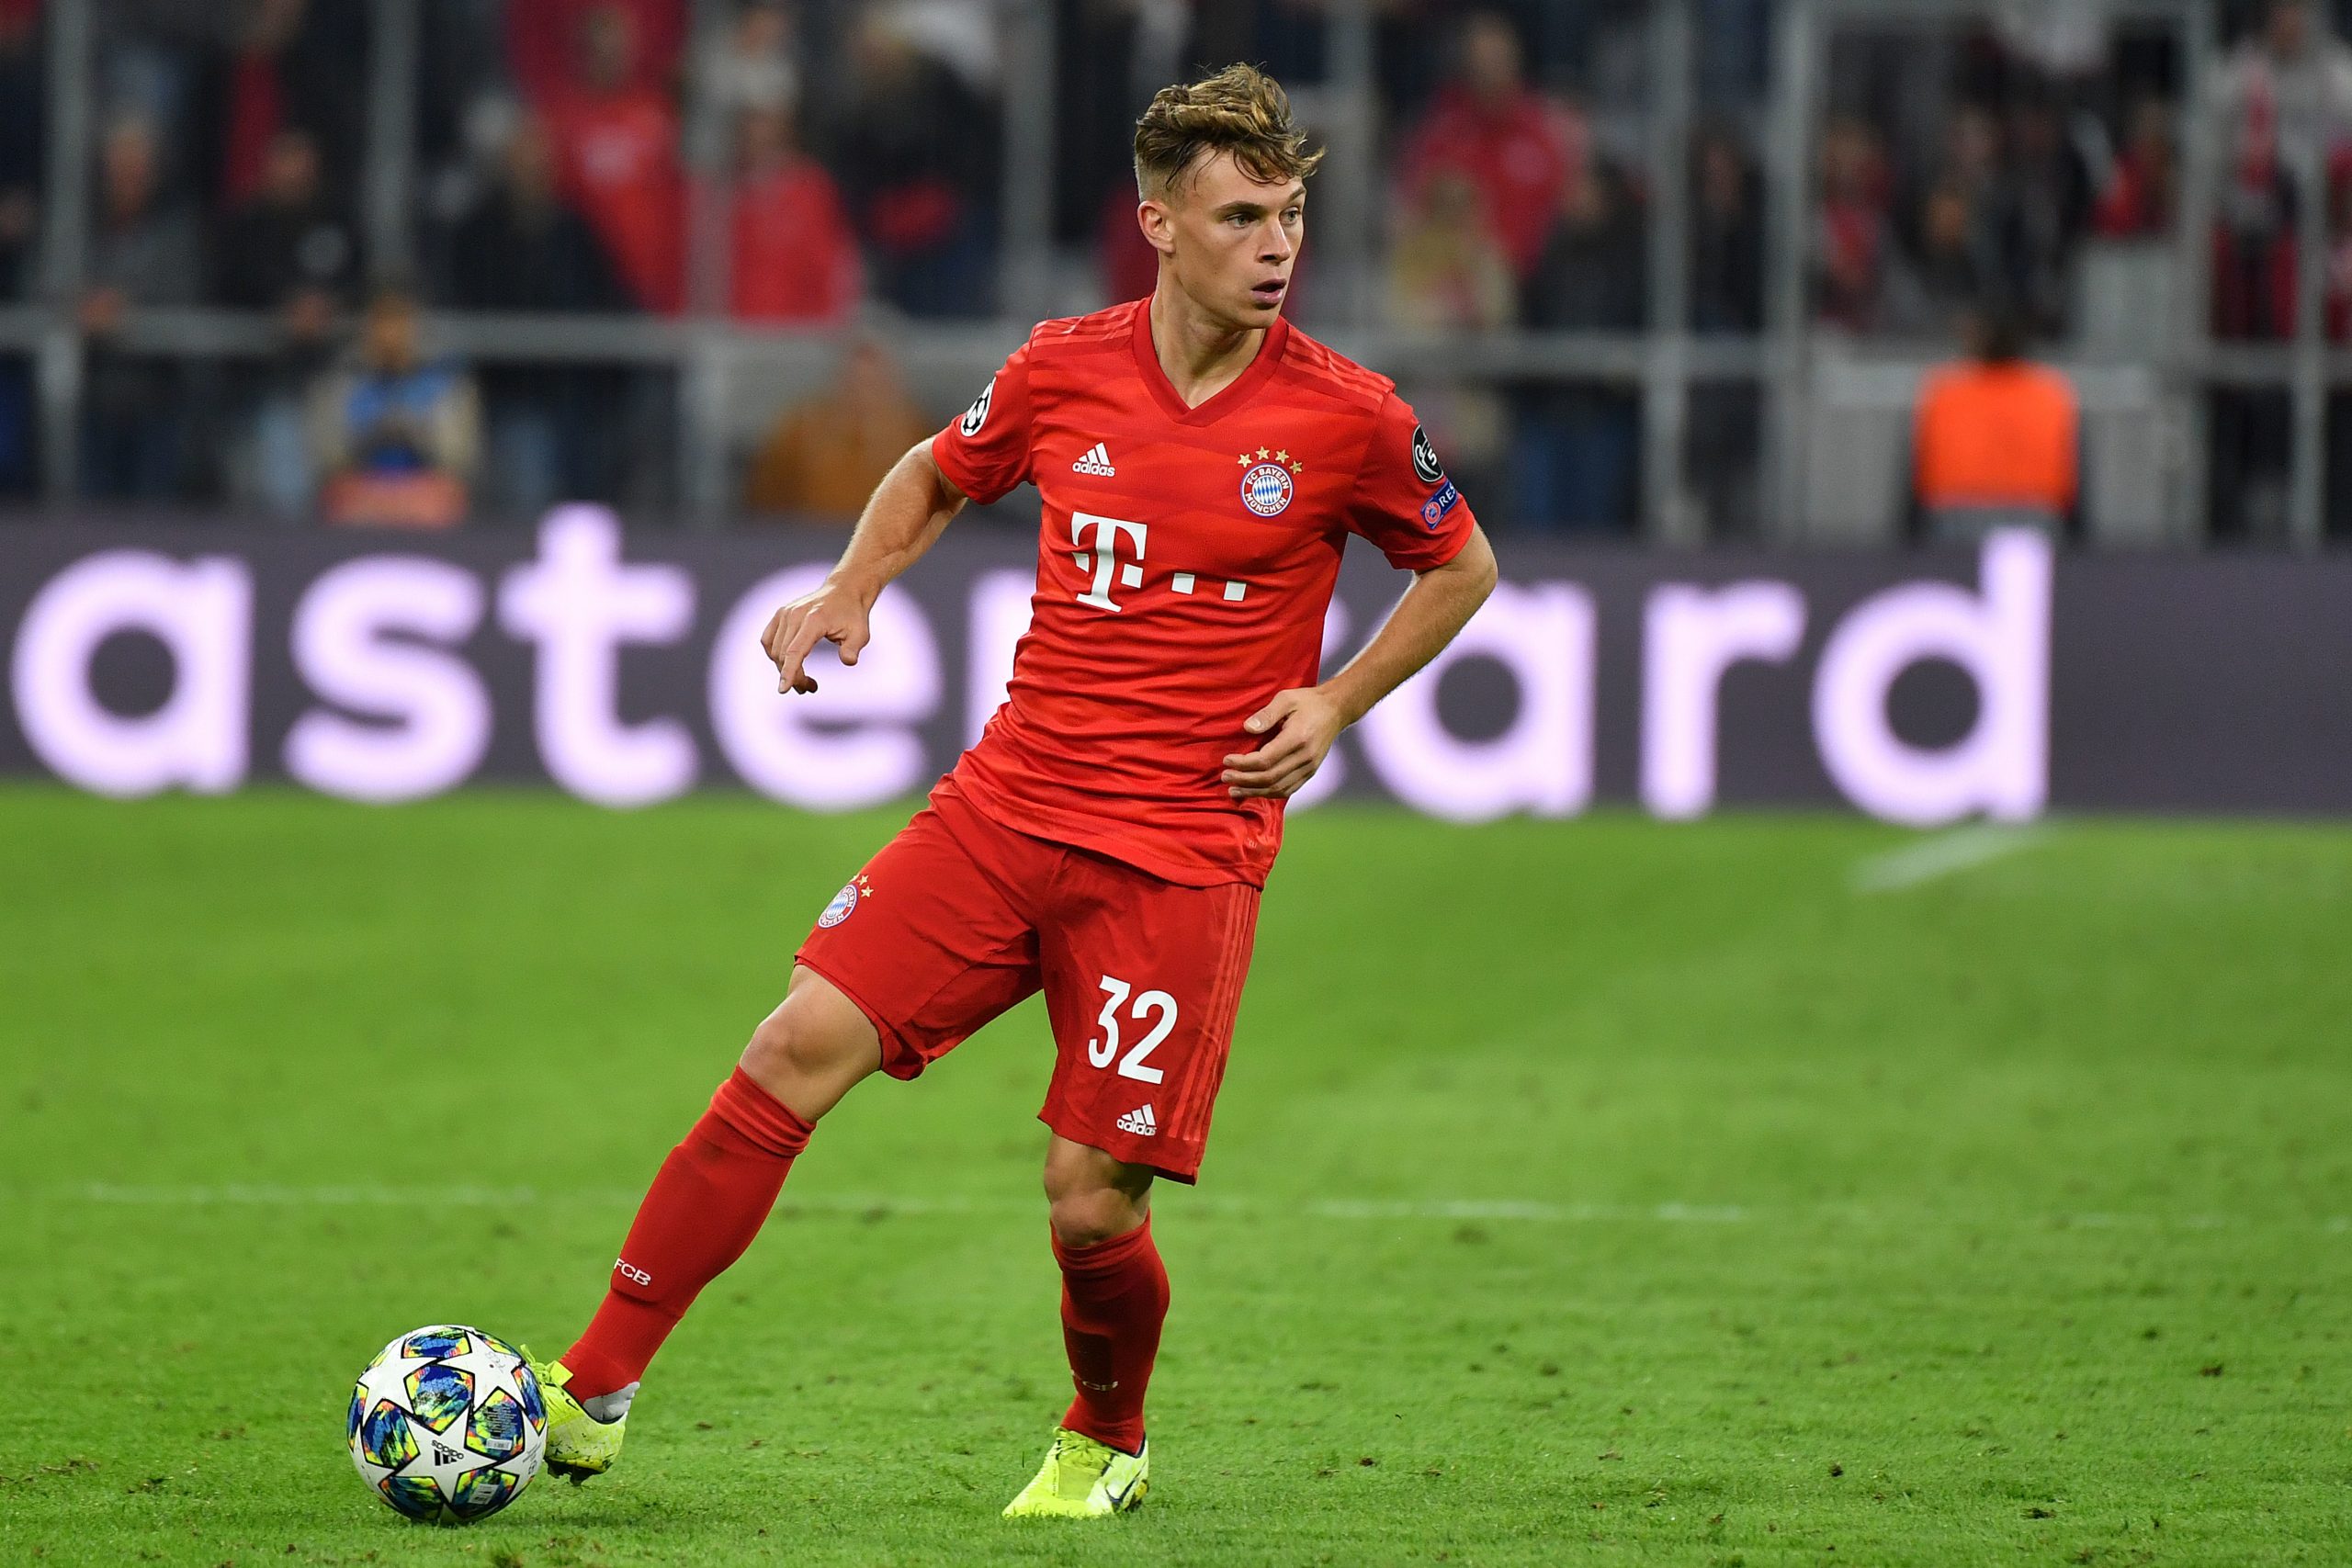 Joshua Kimmich is the key to Bayern's revitalized midfield